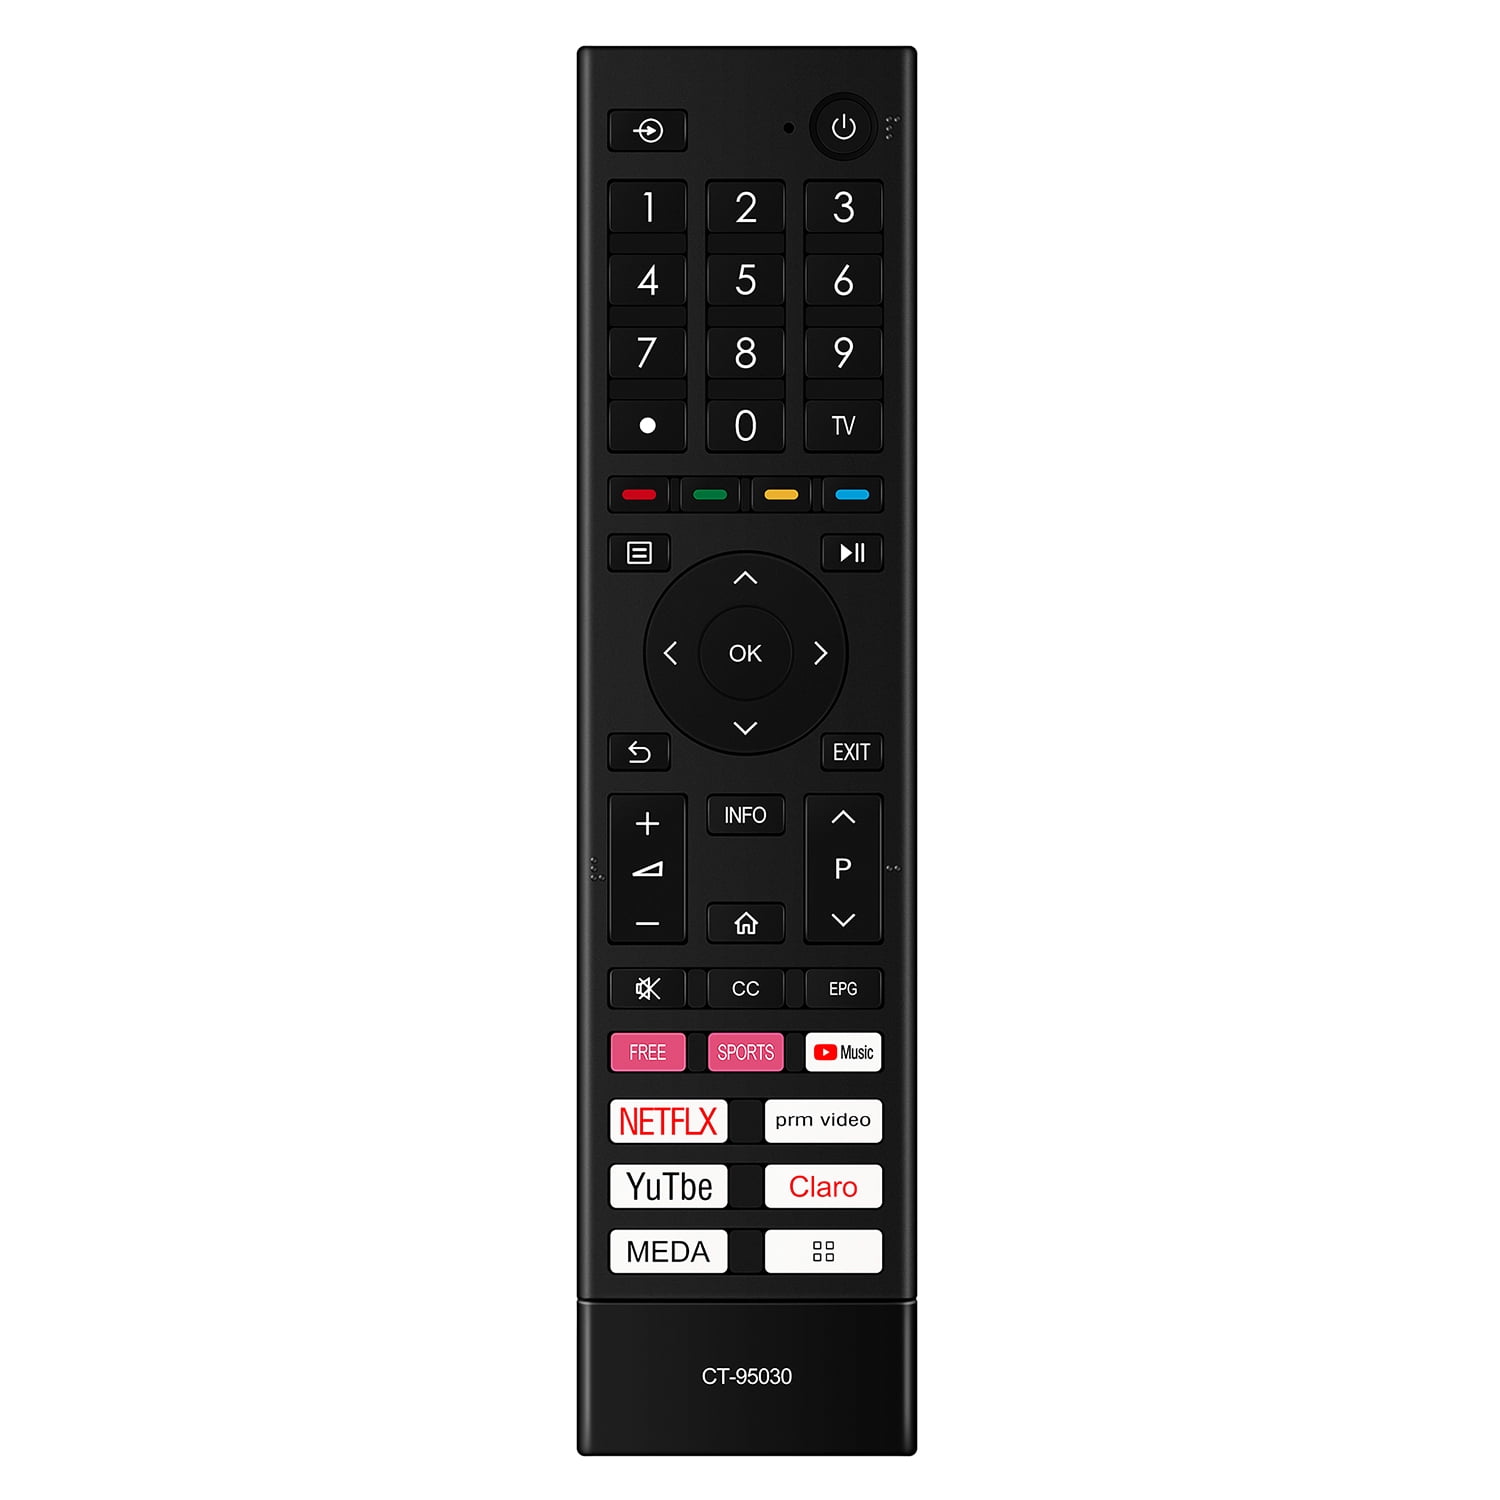 Vinabty CT-95030 Replaced Remote Control Fit For Toshiba and HISENSE LED LCD TV wiht APPS FREE SPORTS MUSIC NETFLIX PRIME-VIDEO YOUTUBE CLARO MEDIA